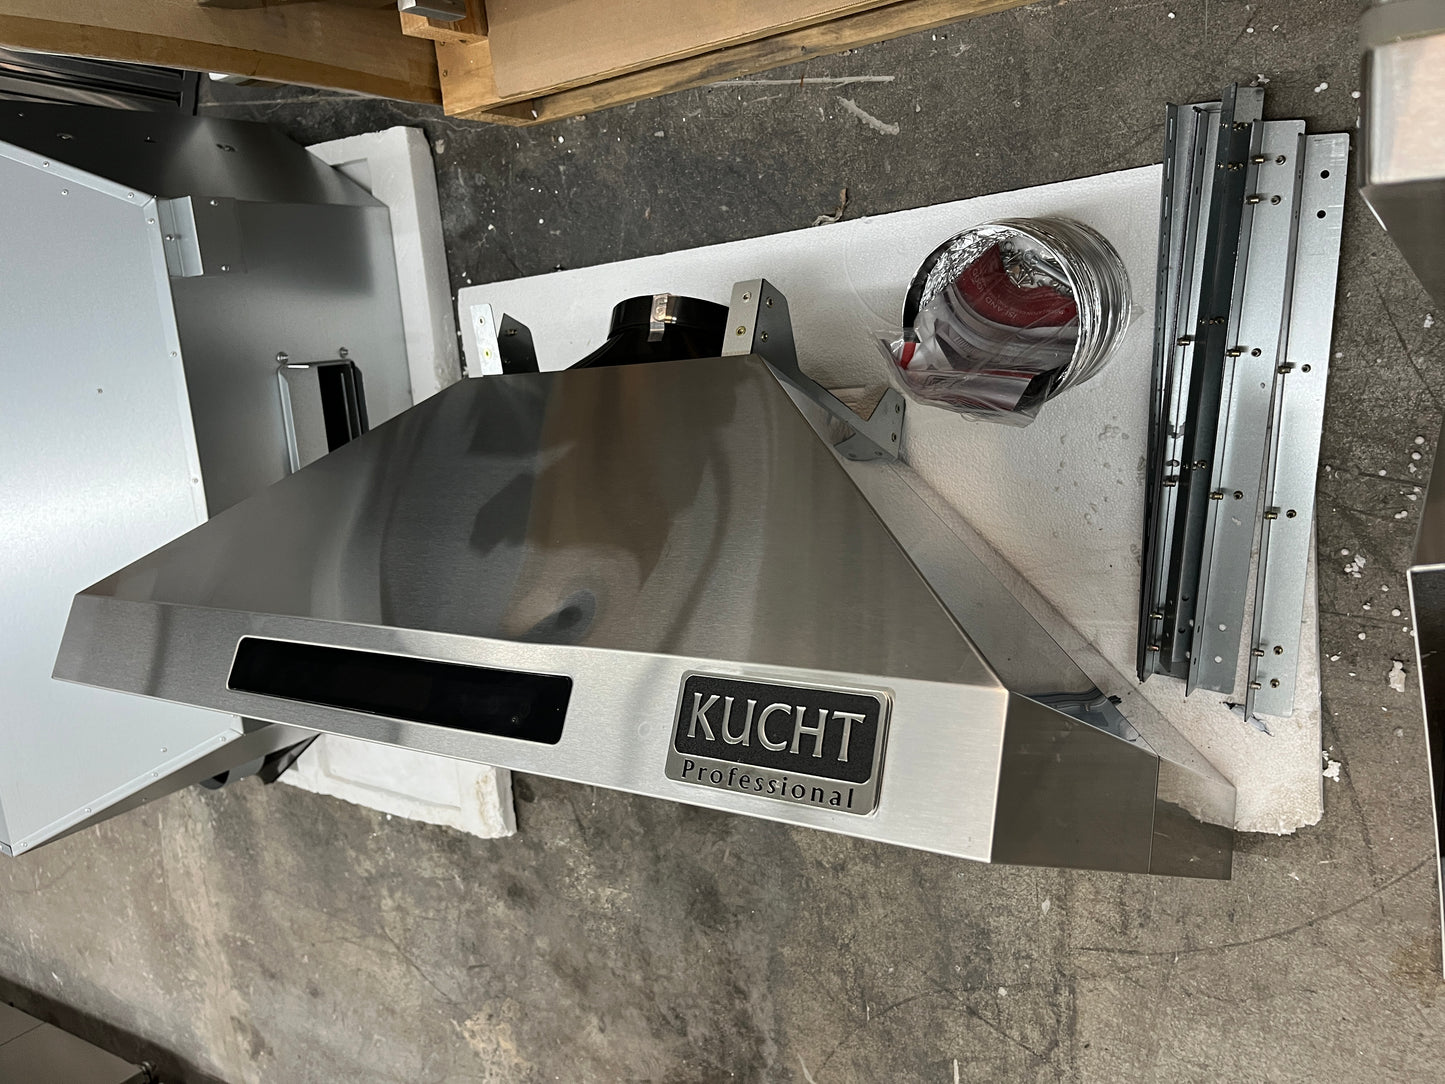 Kucht KRH3612IS Professional Series 36 Inch Pro Style Island Mount Ducted Hood 900 CFM, LED Lights, LED Lighting, Stainless Steel Baffle Filter, Remote Control, Dishwasher Safe Filters in Stainless Steel, 369240